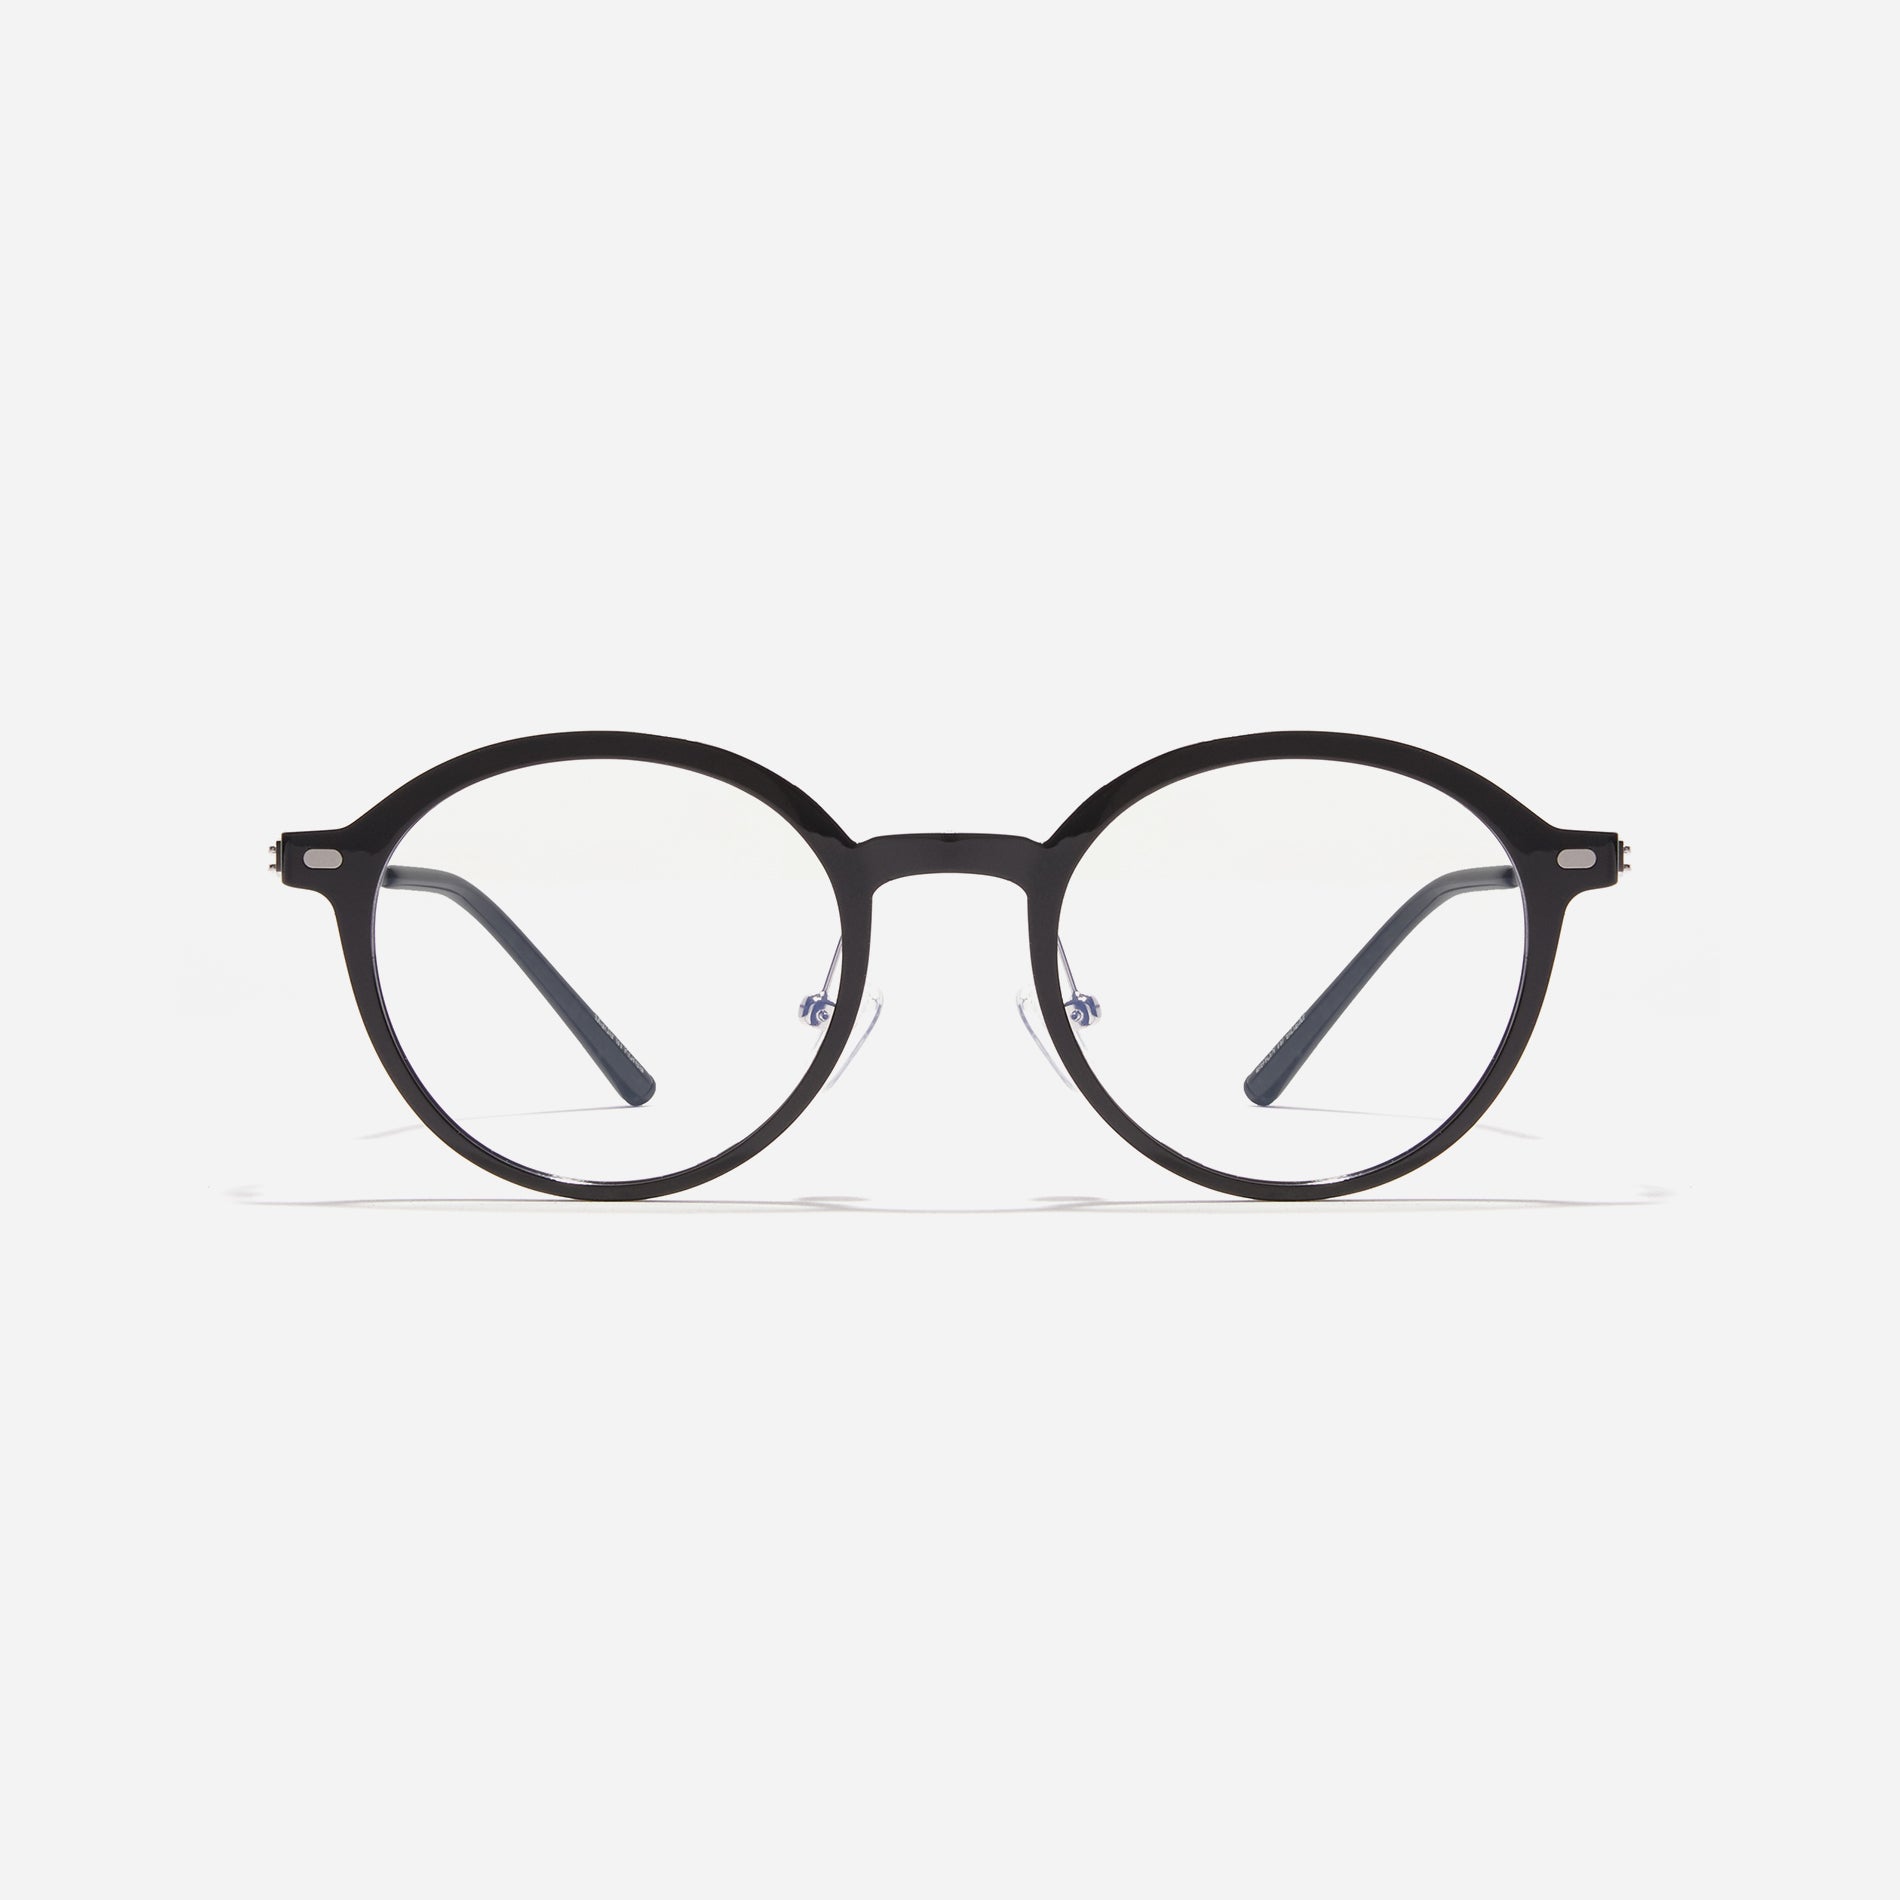 Round-shaped combination eyeglasses from CARIN's 'Feather Fit' line. Their combination frame seamlessly blends bio-plastic and titanium, utilizing advanced injection molding technology, often seen in the manufacturing of cell phones and watches.